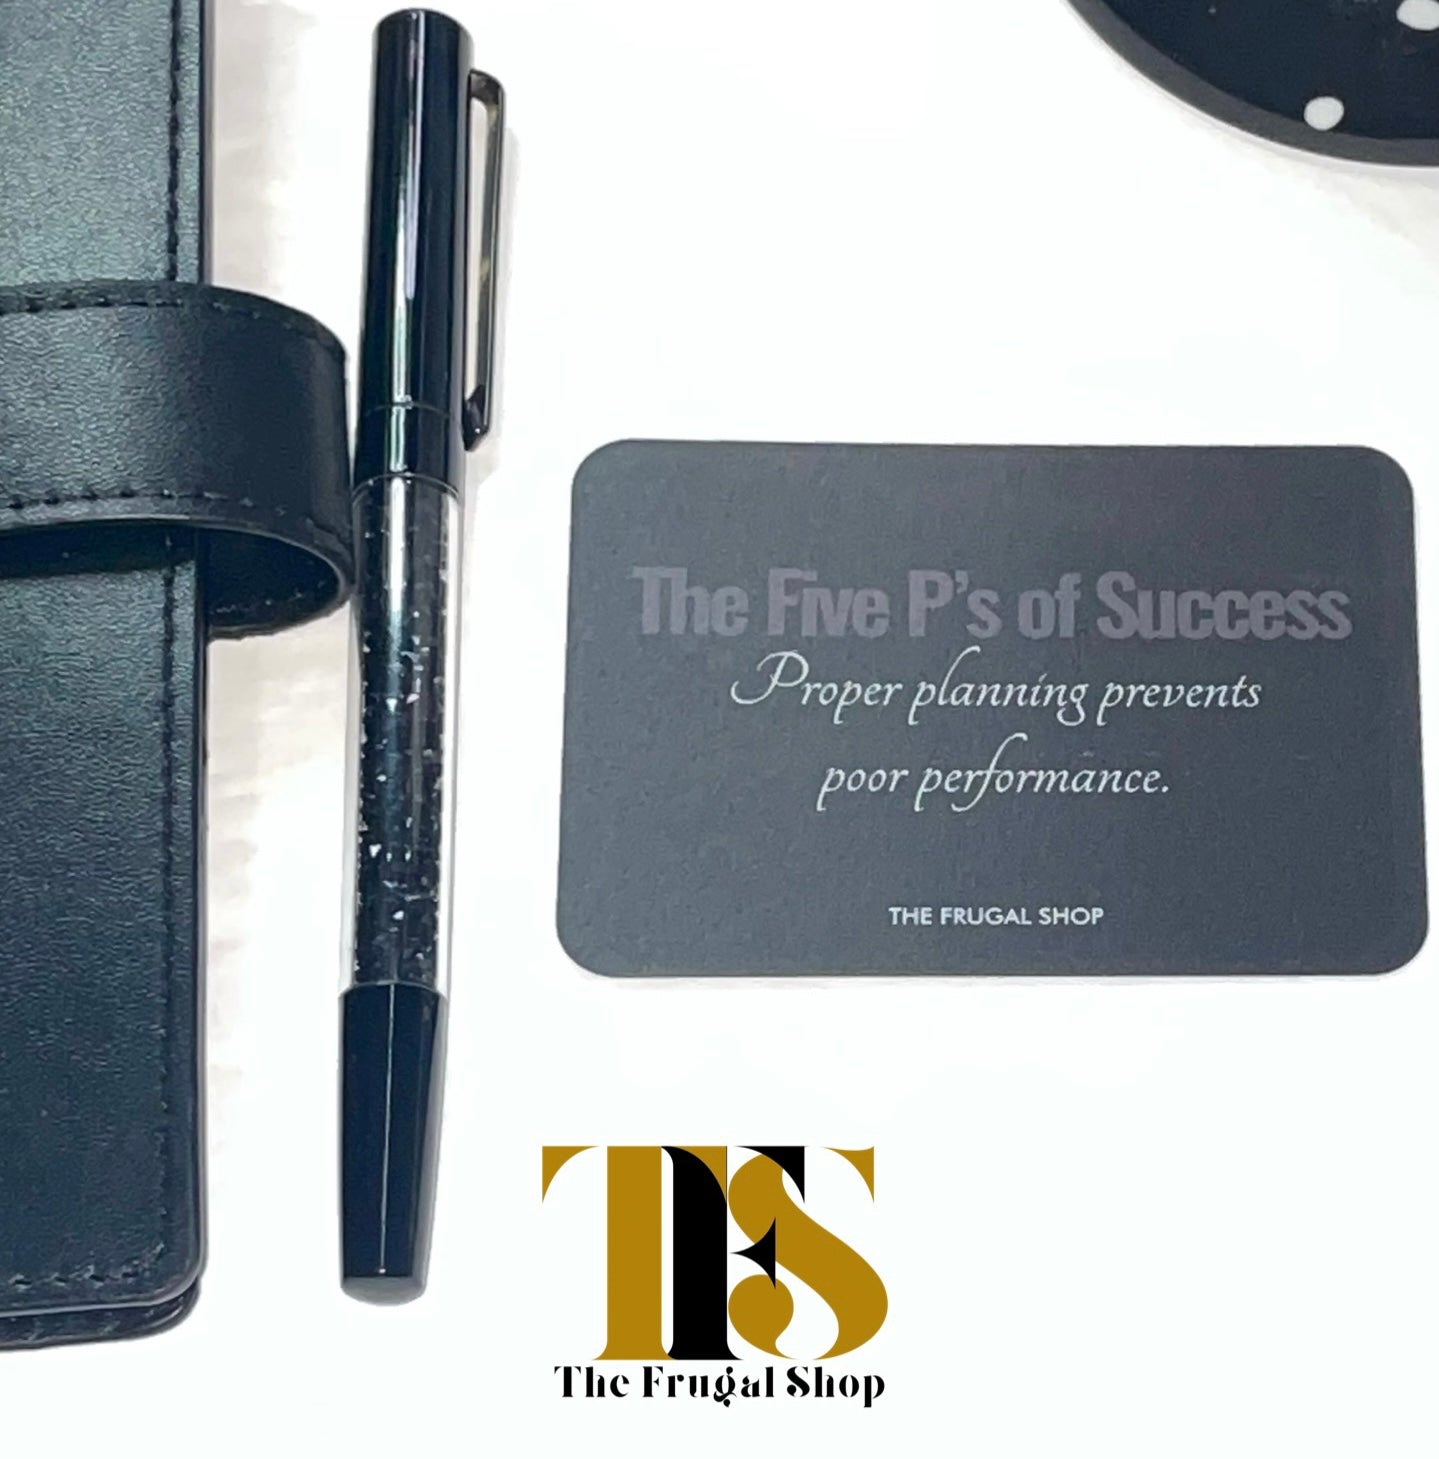 Manifest It Success 5 Ps Double Sided Planner Card